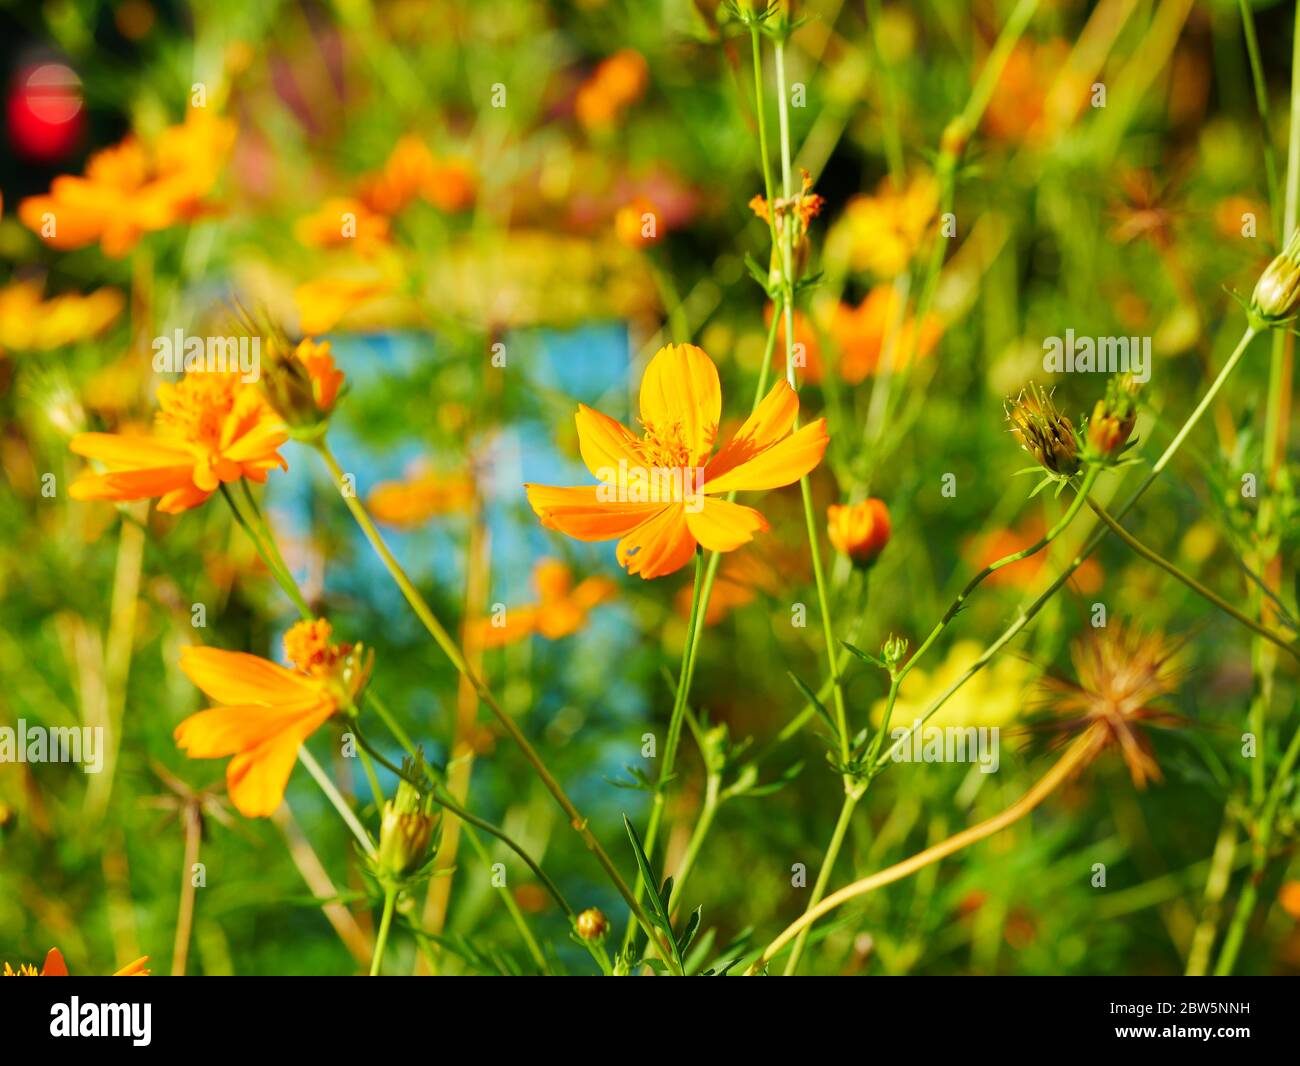 Download Sulfur Yellow Sulphureus Flowers High Resolution Stock Photography And Images Alamy PSD Mockup Templates